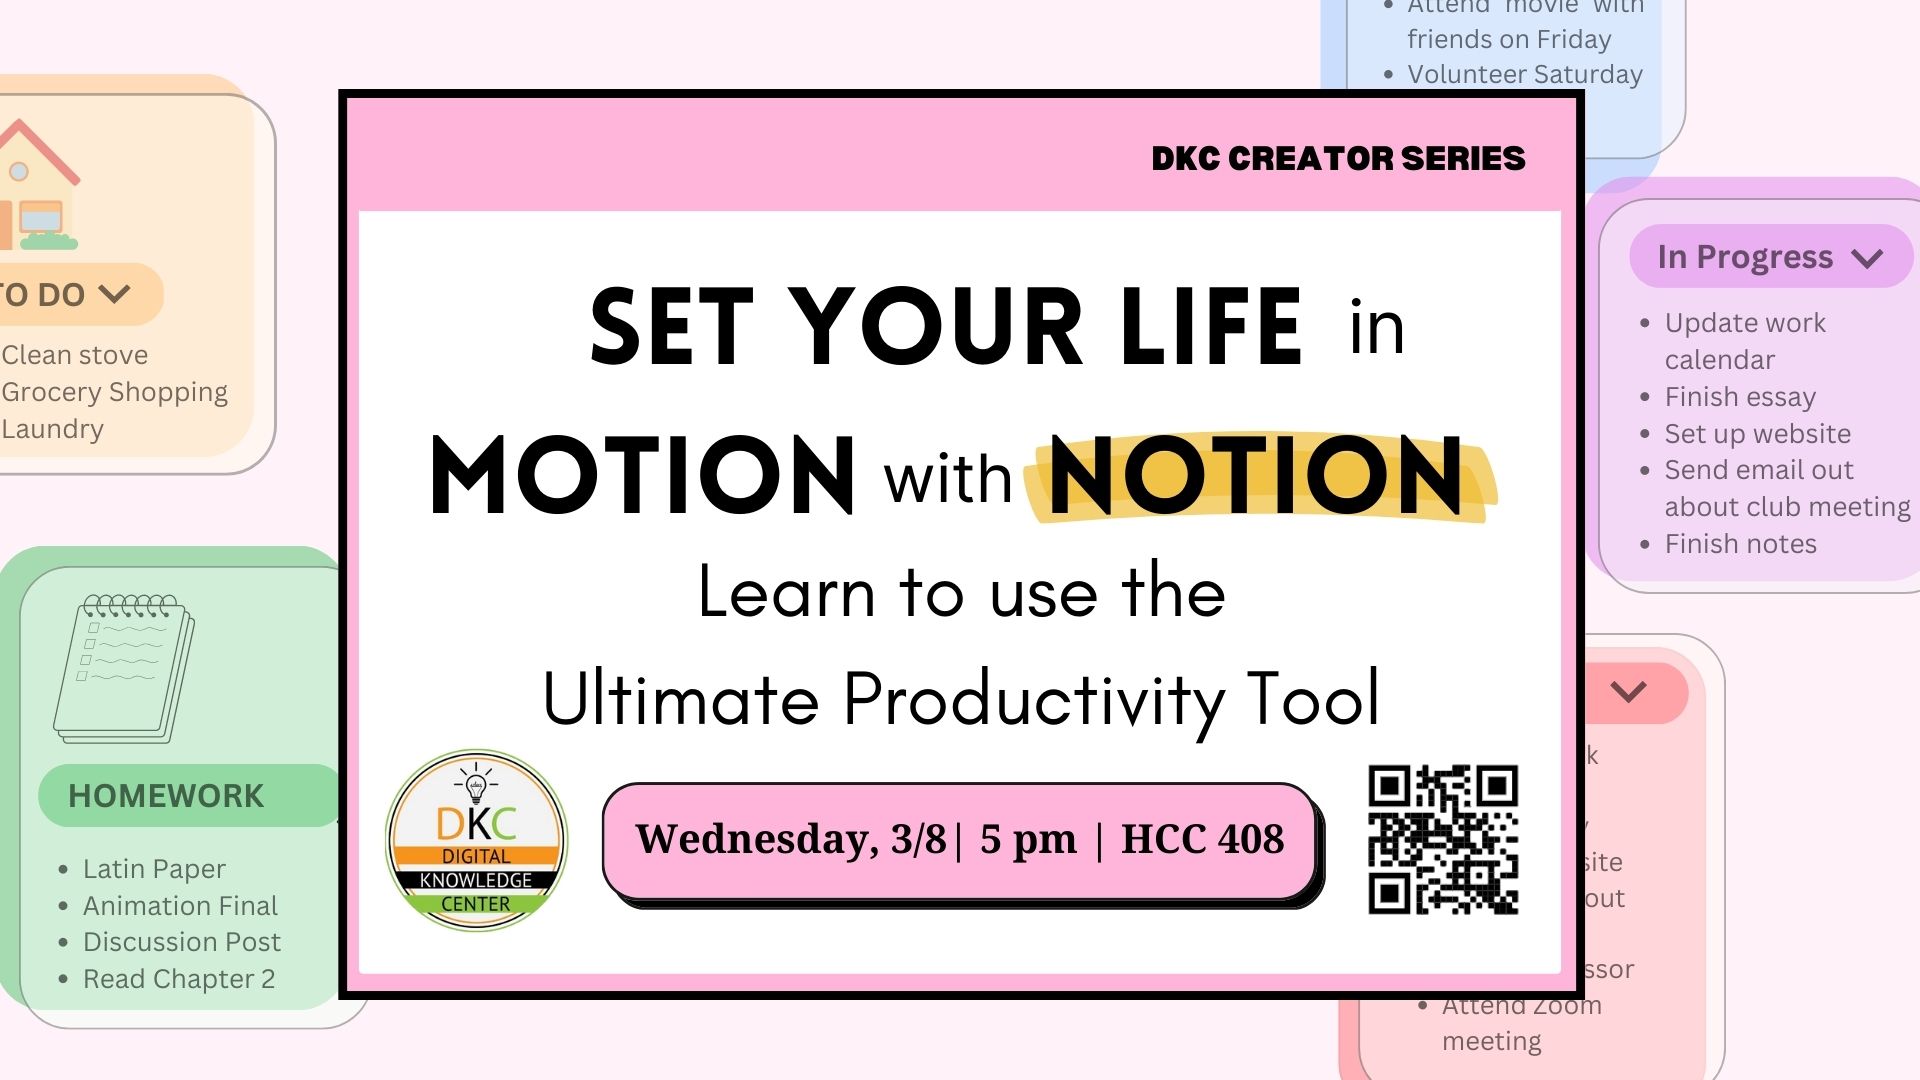 "Set Your Life in Motion with Notion: Learn to use the ultimate productivity tool" workshop on Wednesday, March 8 from 5 to 6pm in HCC 408.